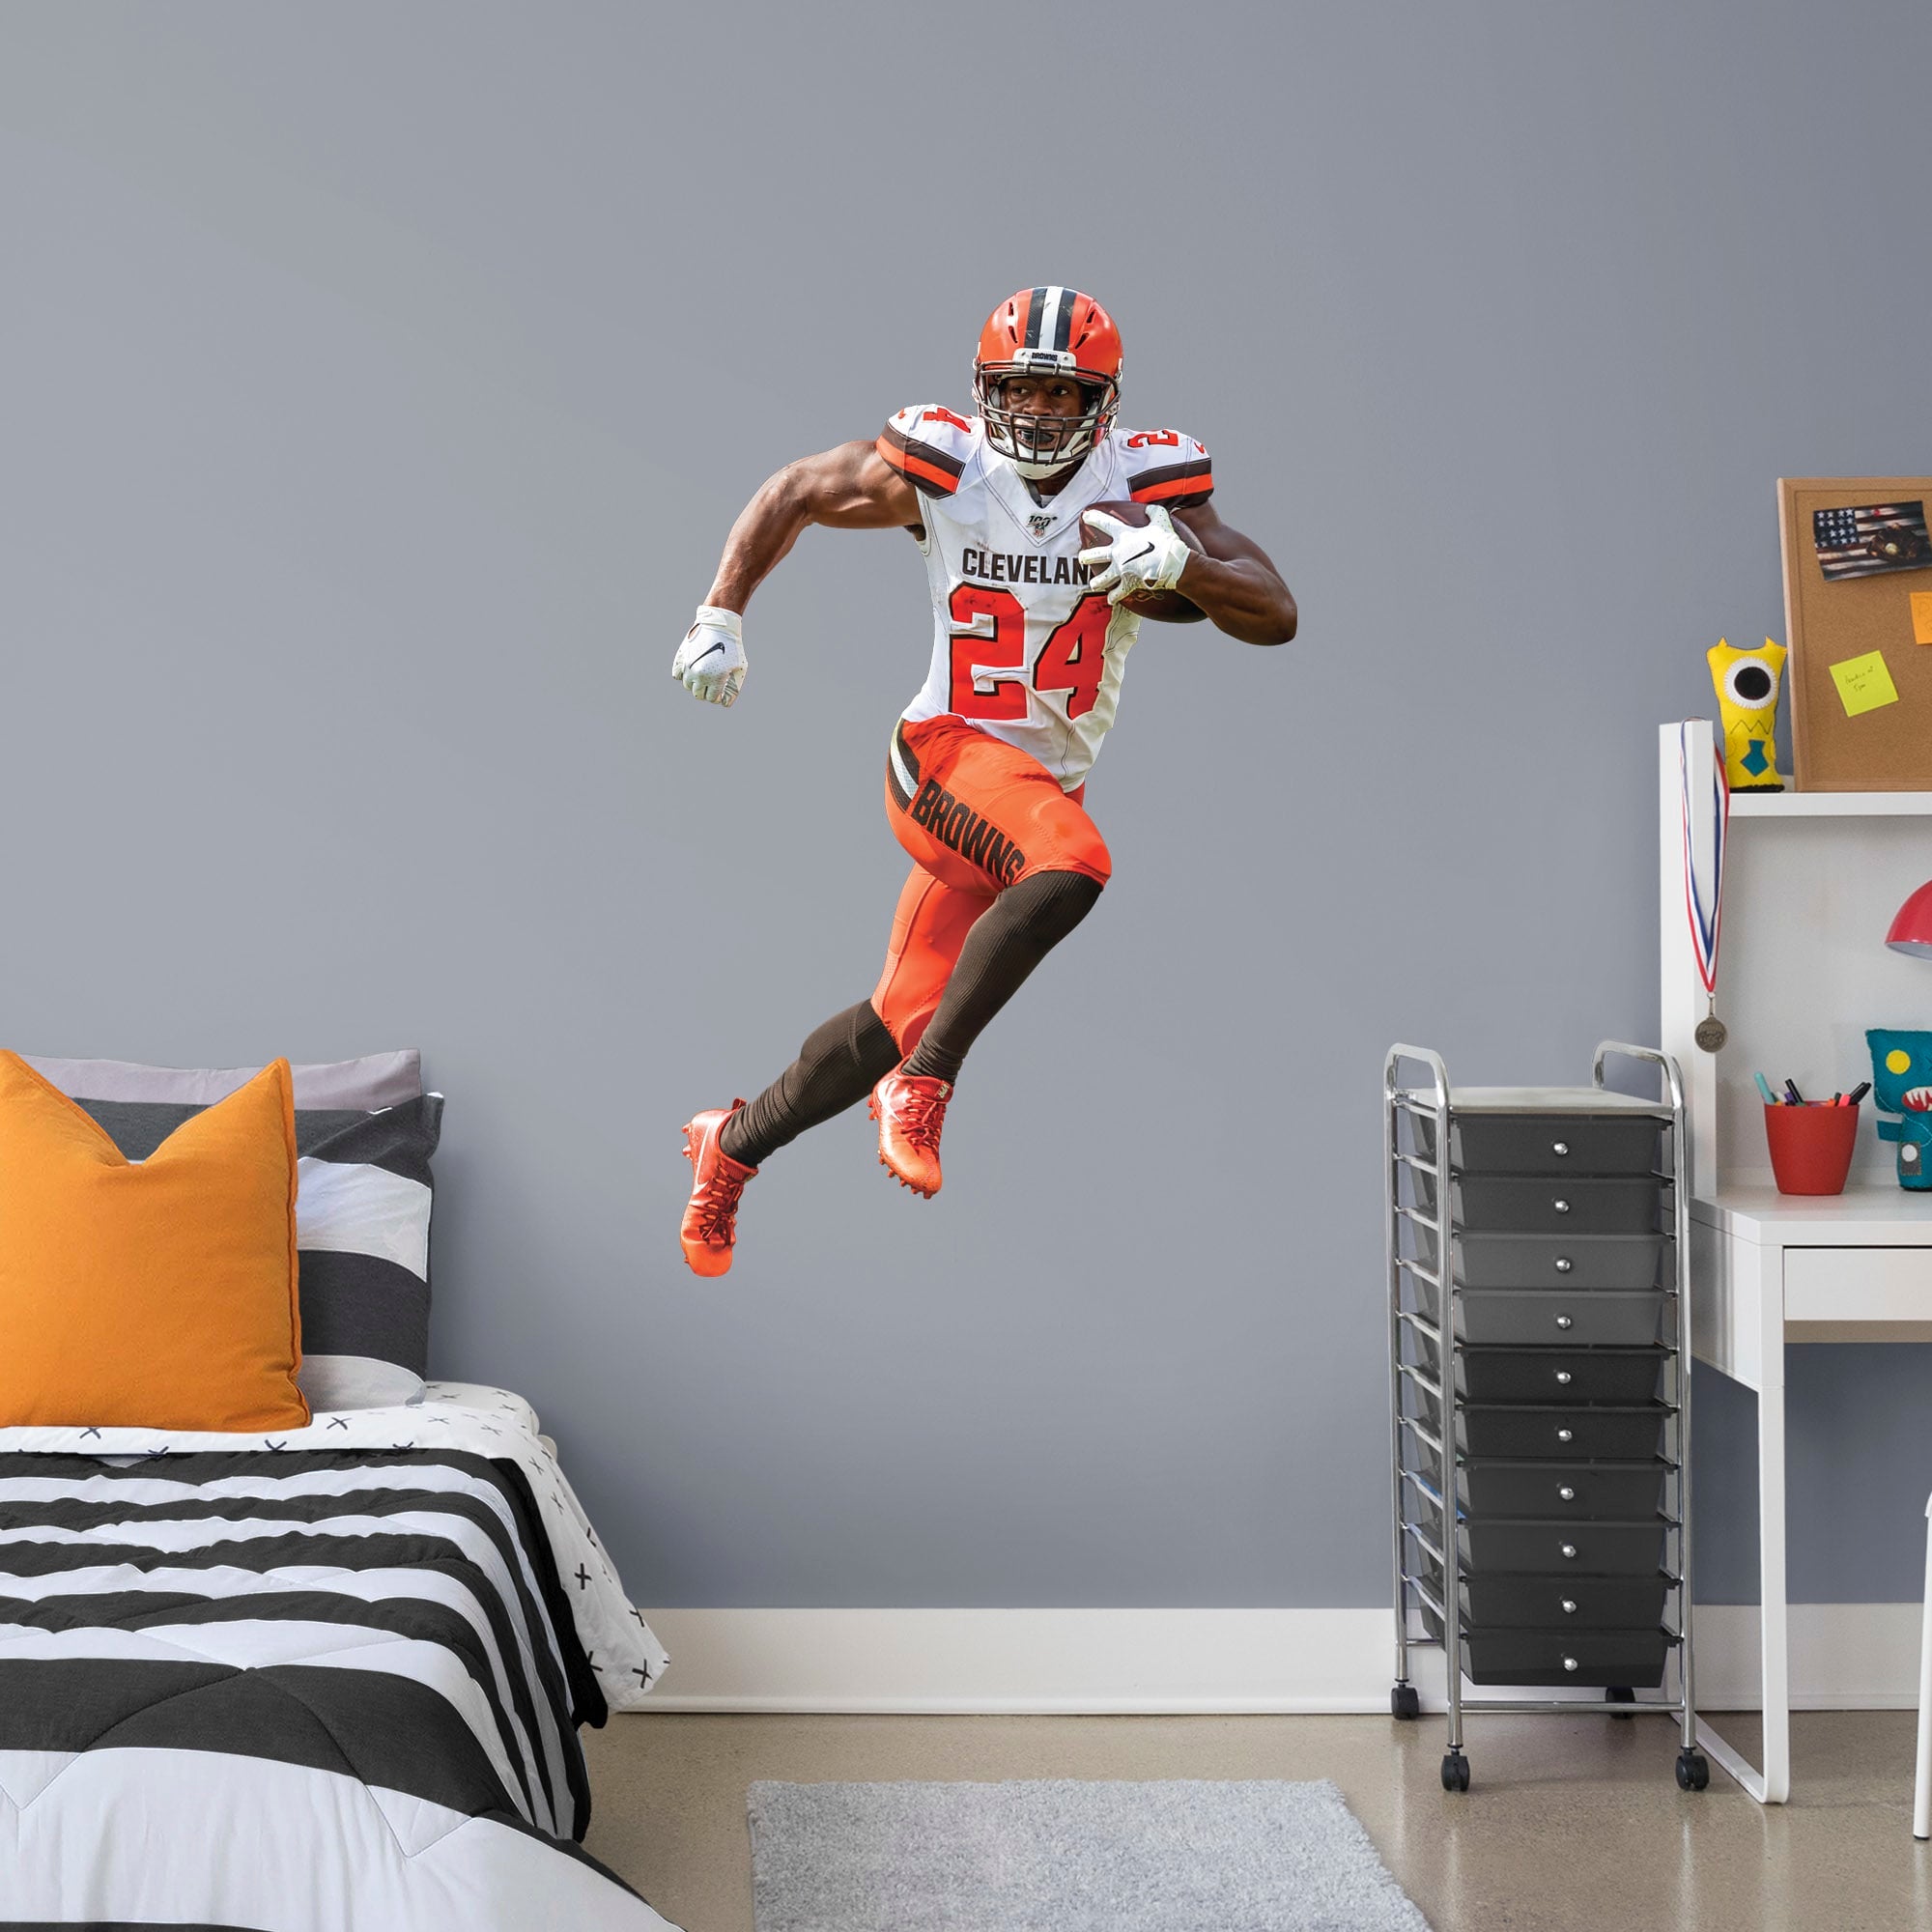 Nick Chubb for Cleveland Browns: Gamebreaker - Officially Licensed NFL Removable Wall Decal Giant Athlete + 2 Decals (32"W x 51"